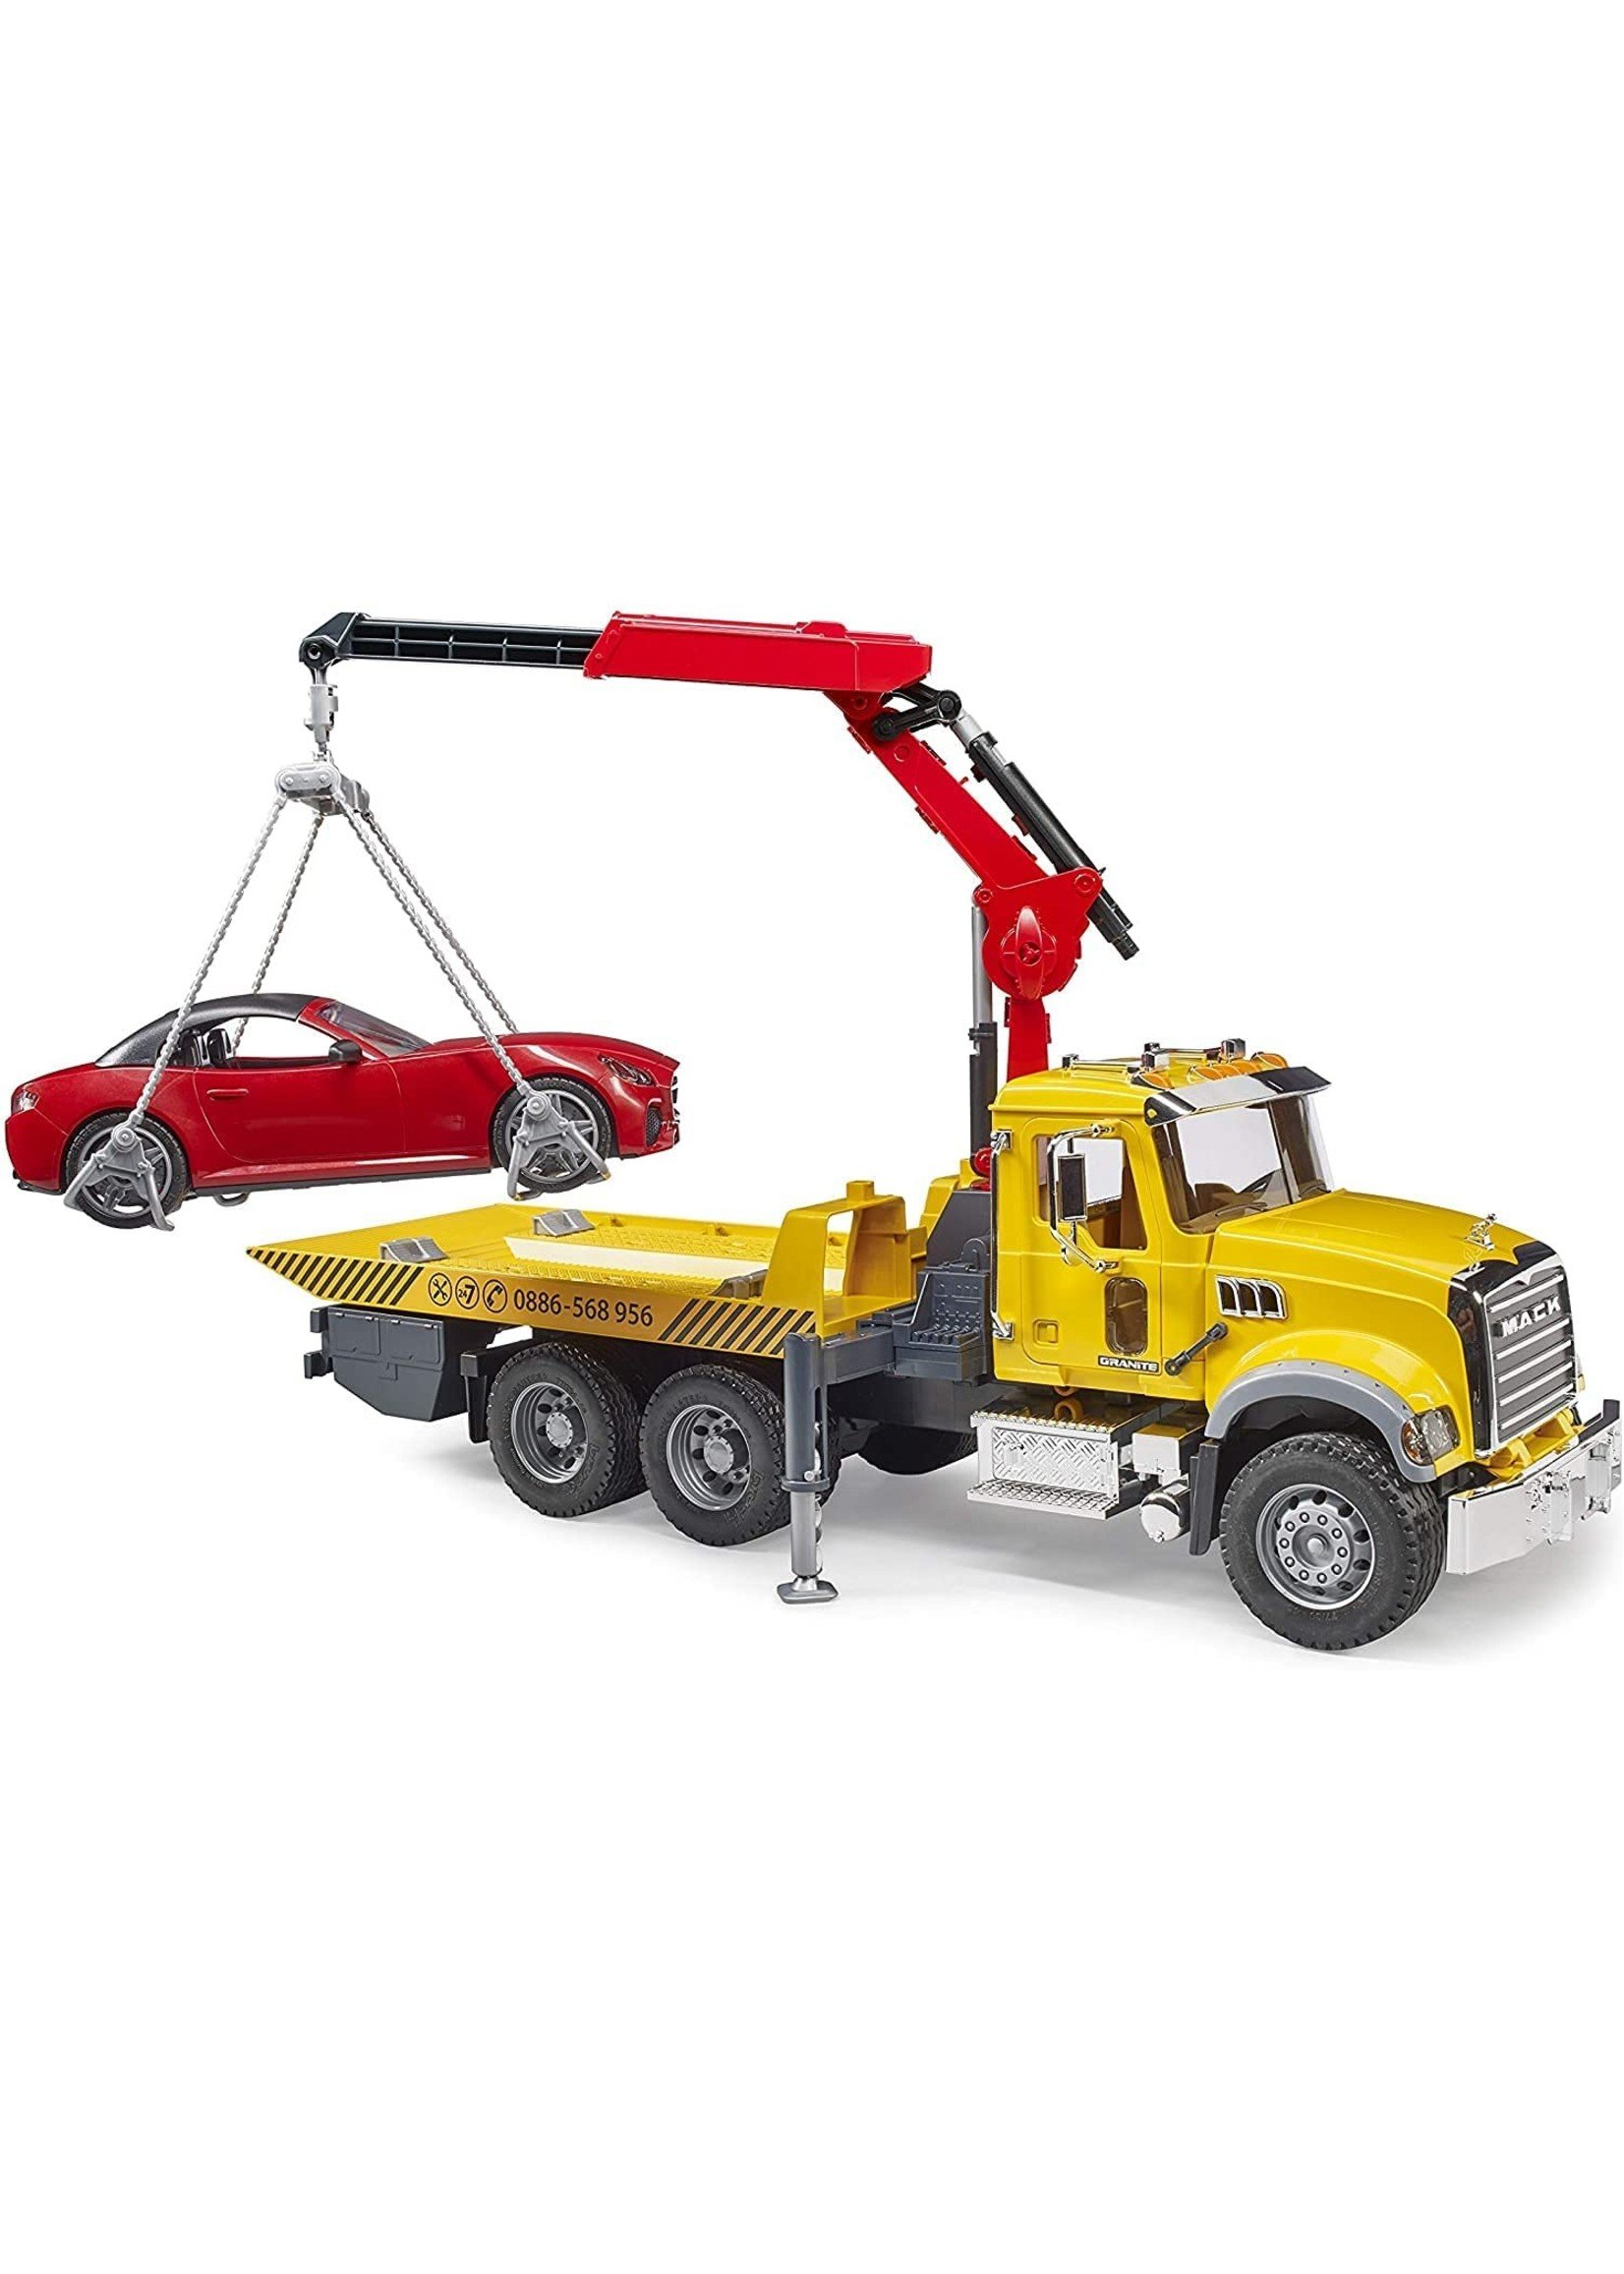 Bruder Toys 02829 - MACK Granite Tow Truck with Roadster